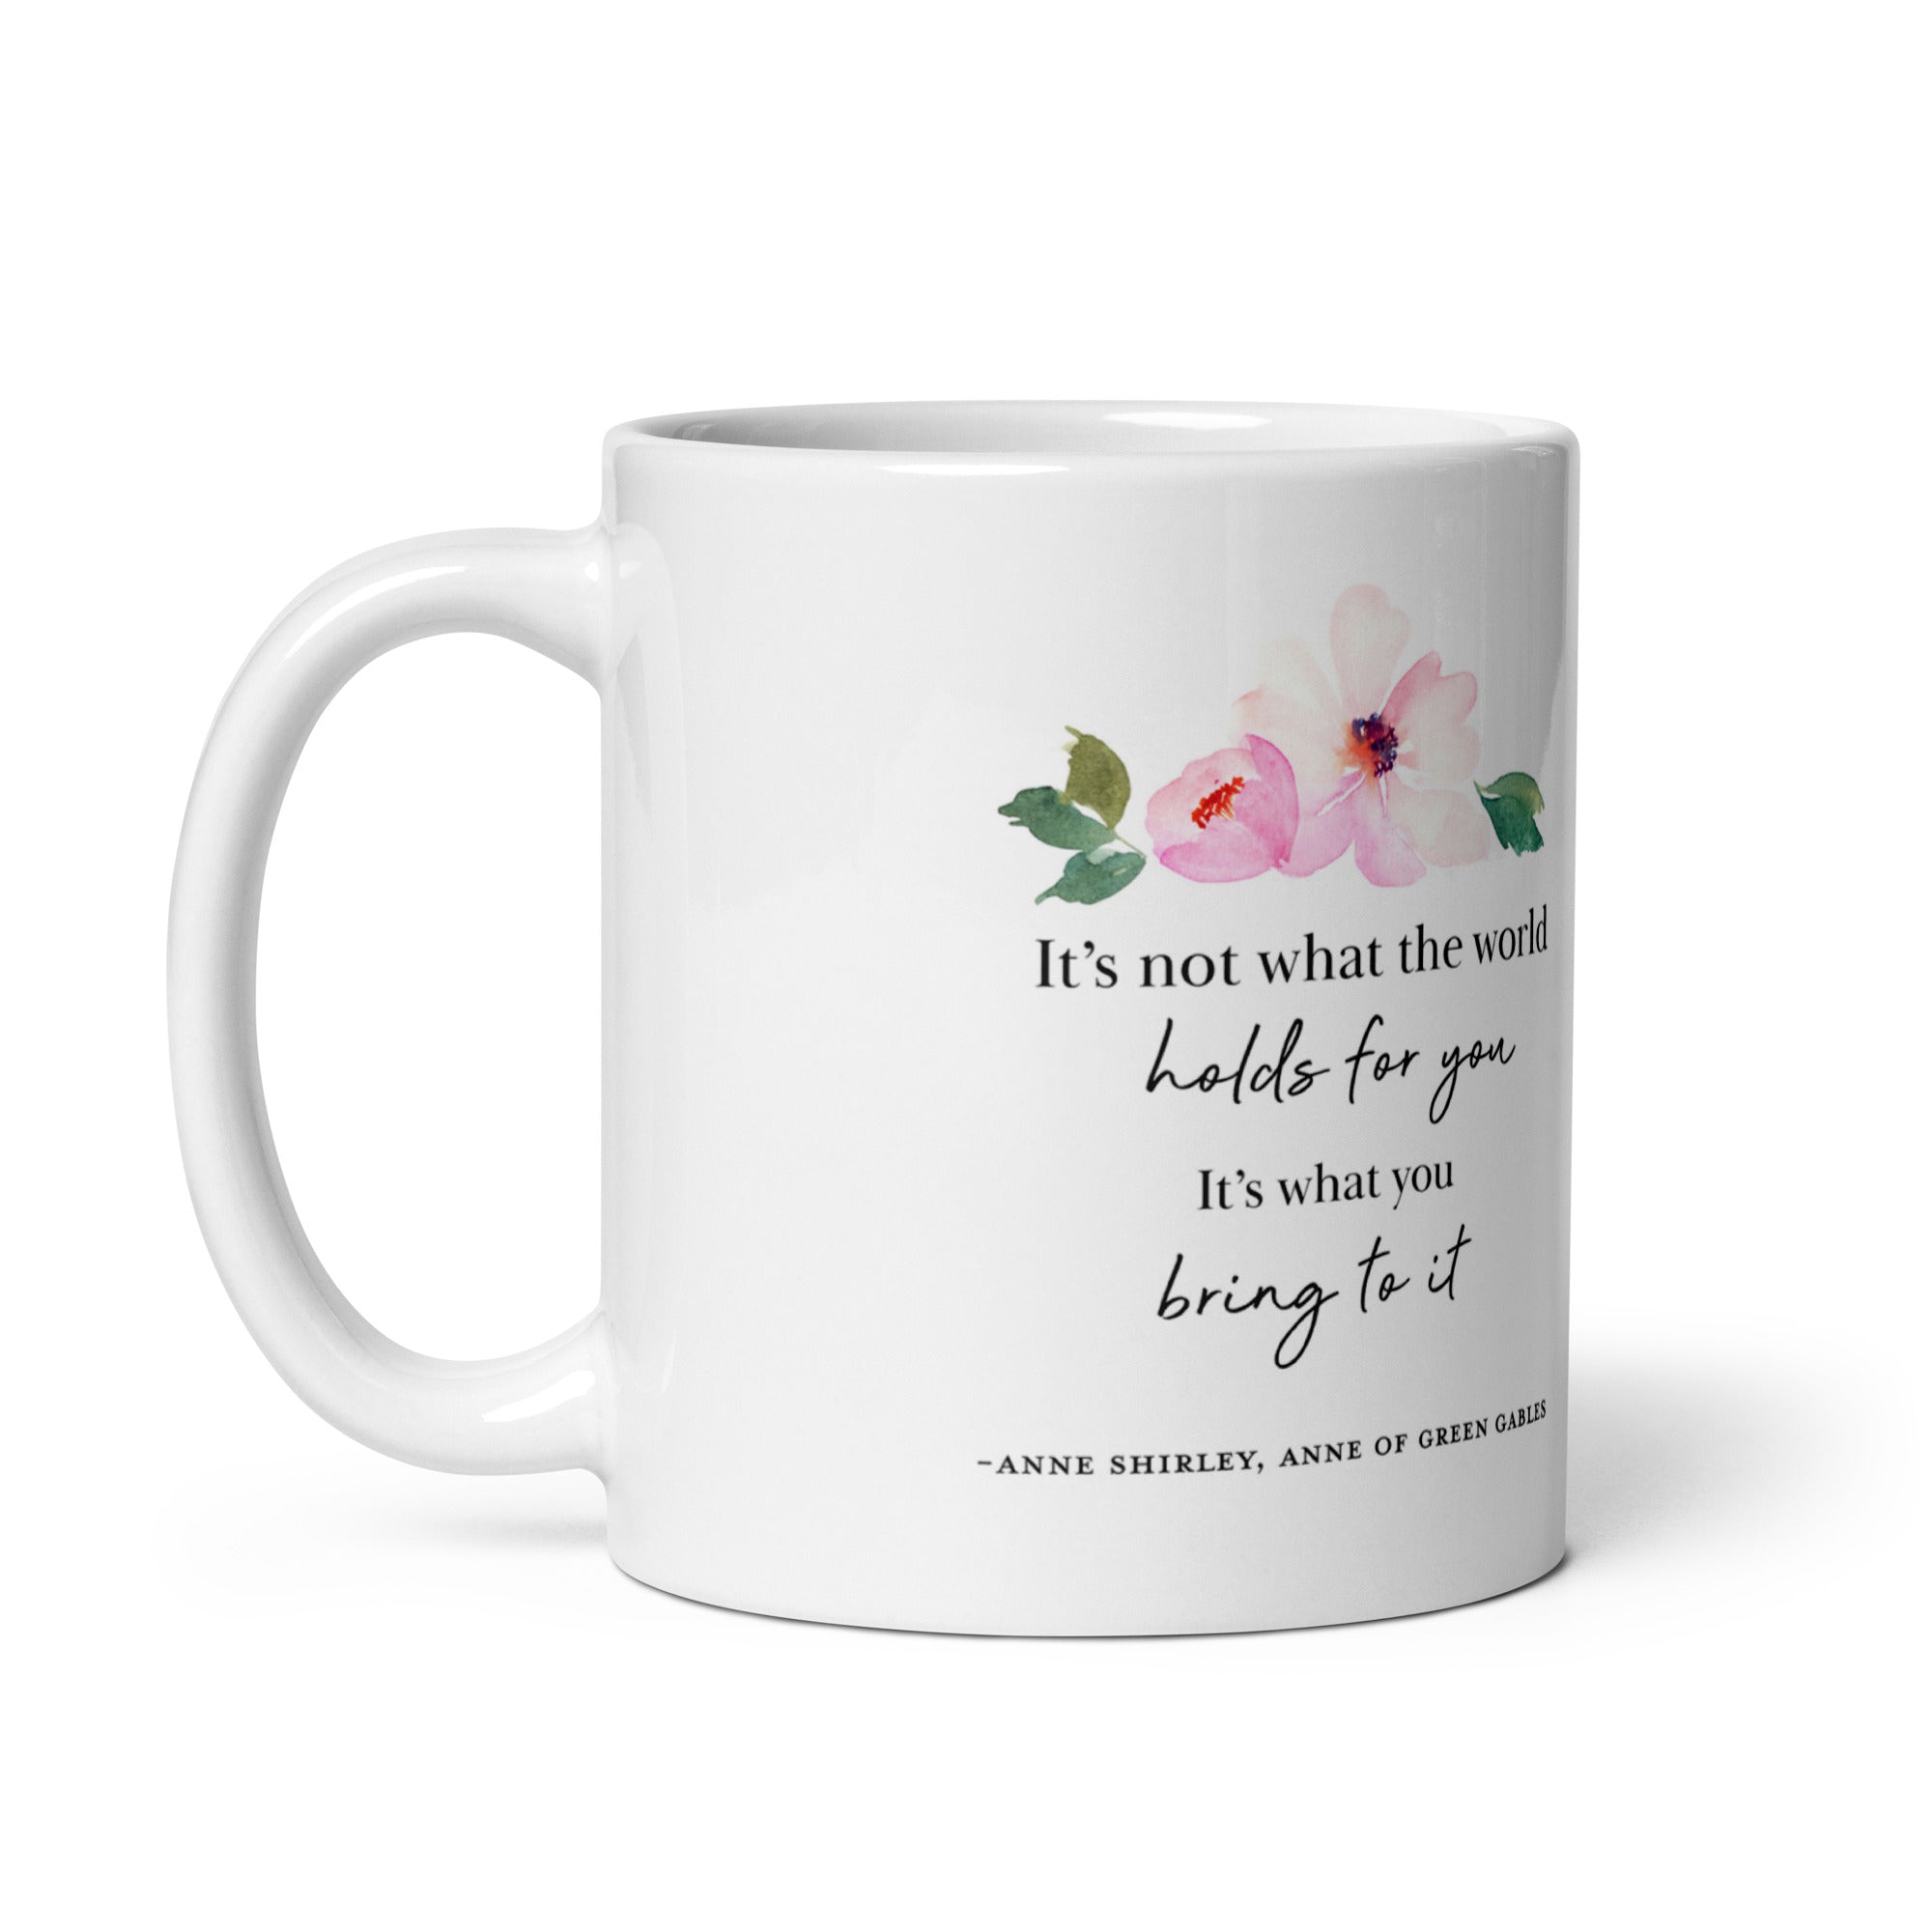 "What The World Holds" Quote Mug